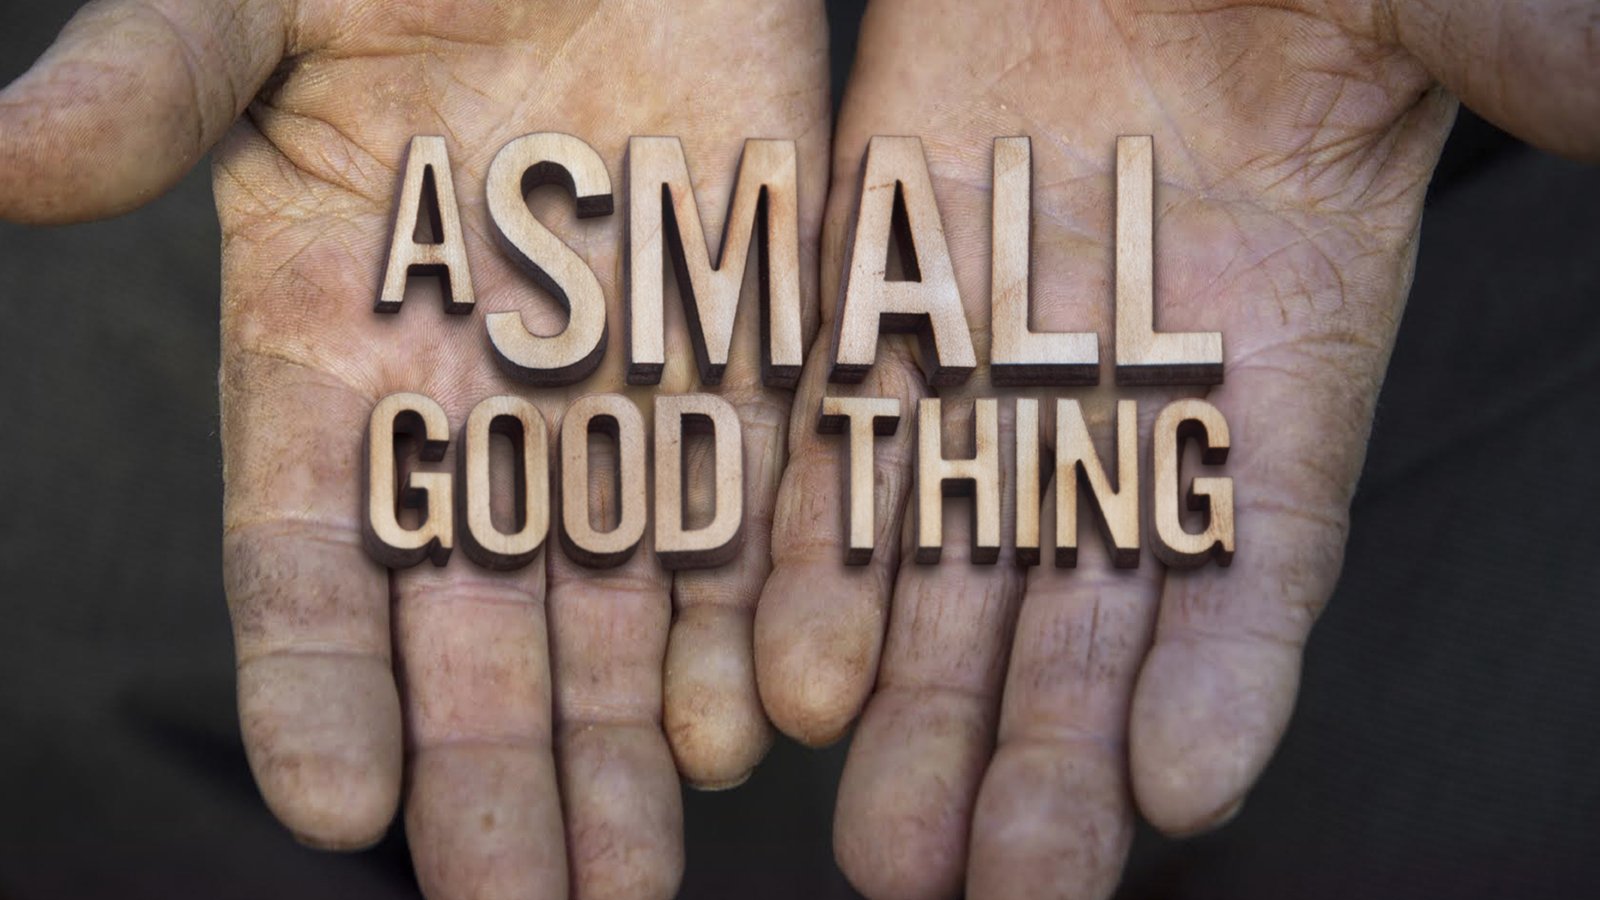 A Small Good Thing - The Sources Of Human Happiness